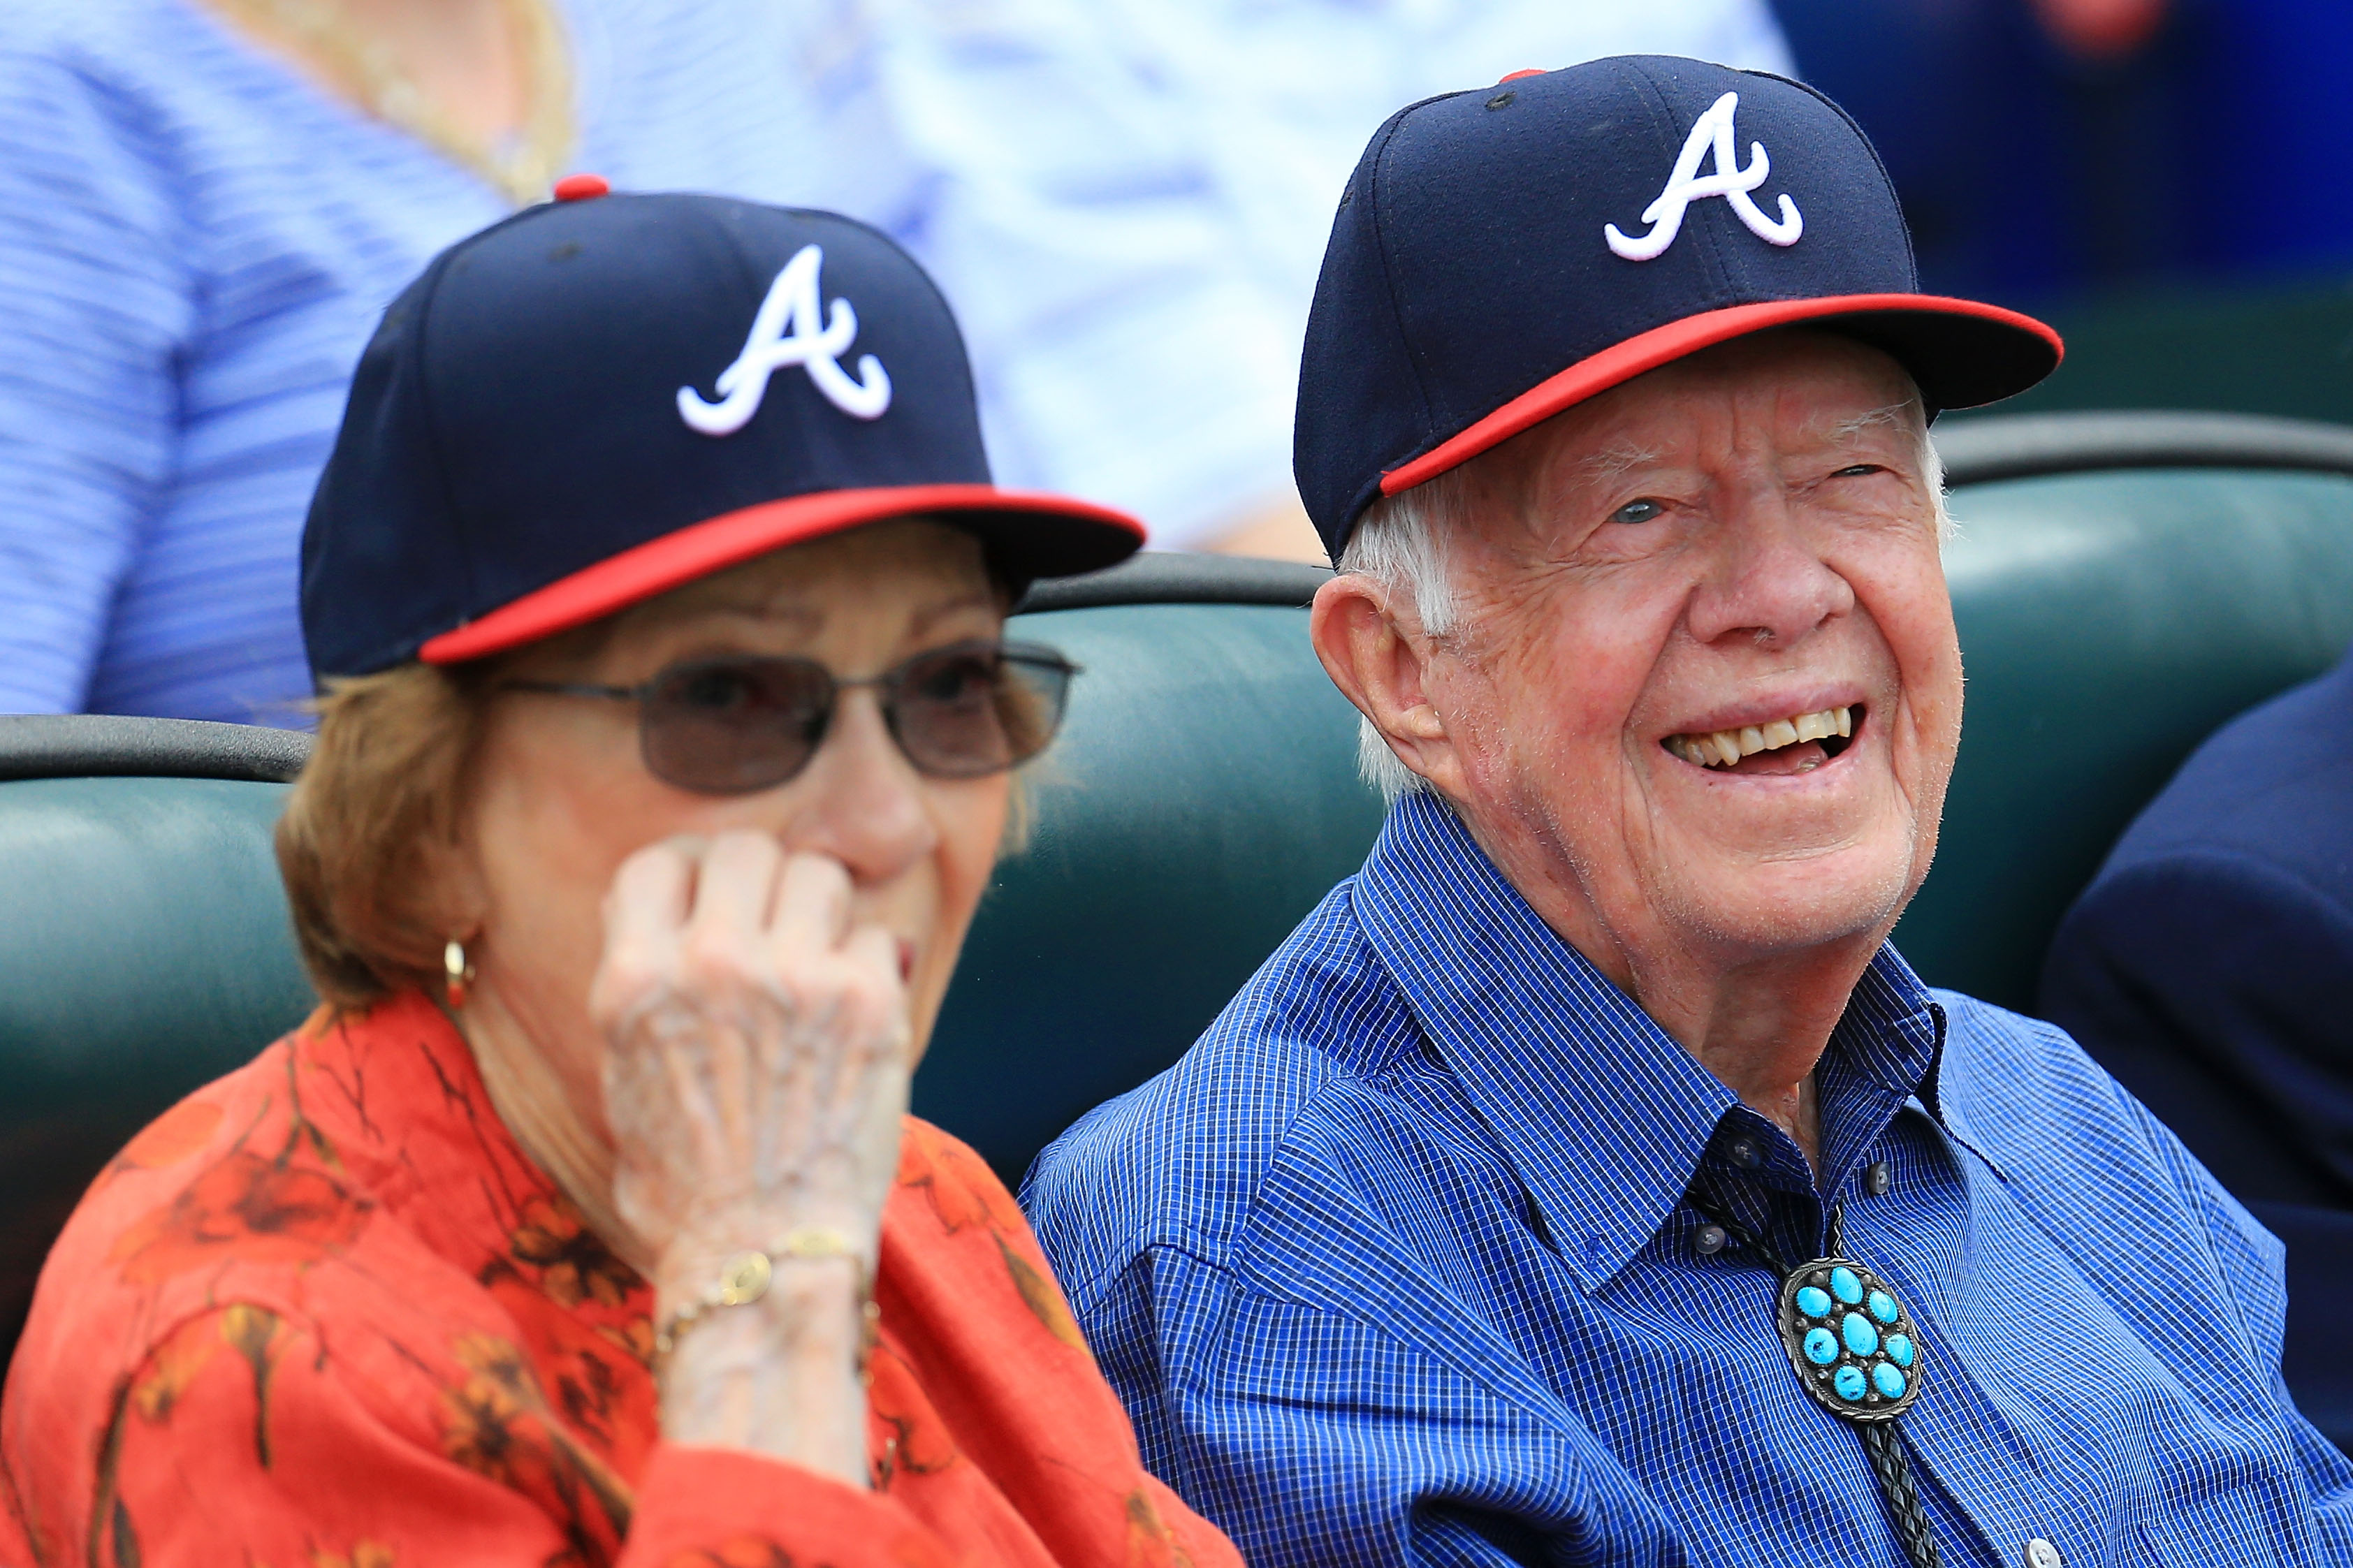 Jimmy Carter sits in the stands in the fourth inning between the Atlanta Braves and the Detroit Tigers at Turner Field in Atlanta, Georgia, on October 2, 2016. | Source: Getty Images